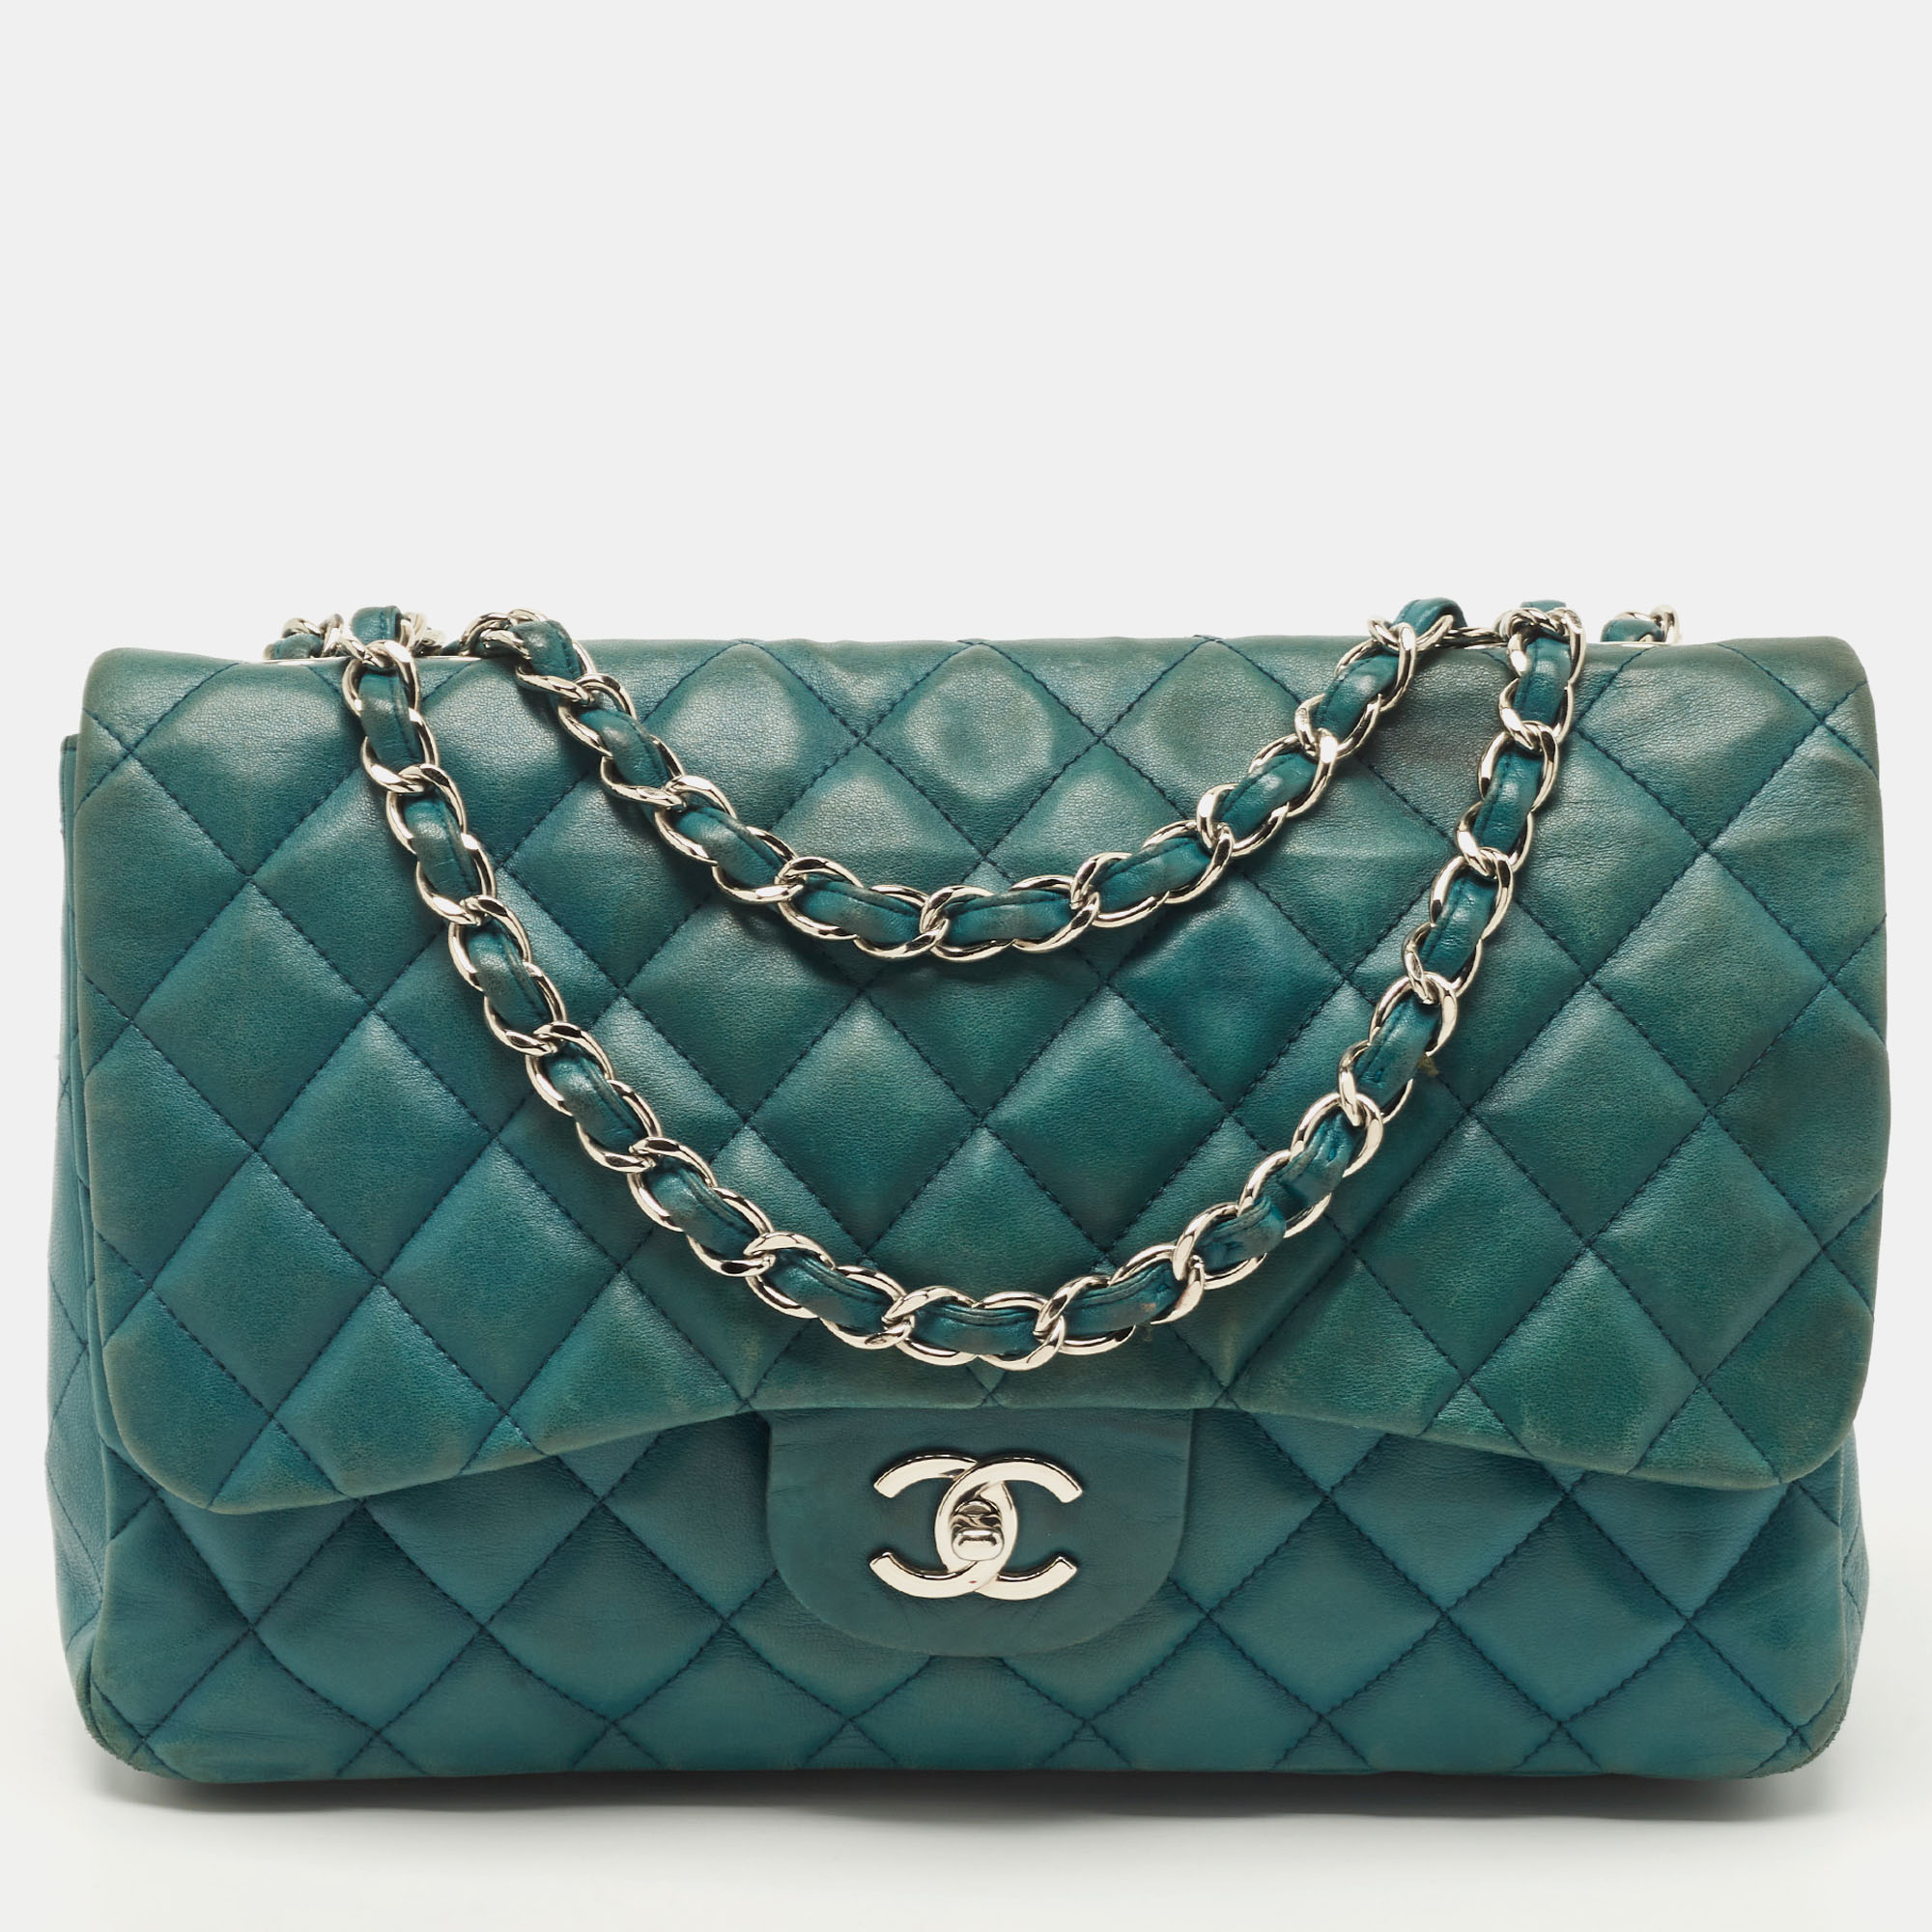 Chanel Teal Green Quilted Leather Jumbo Classic Single Flap Bag